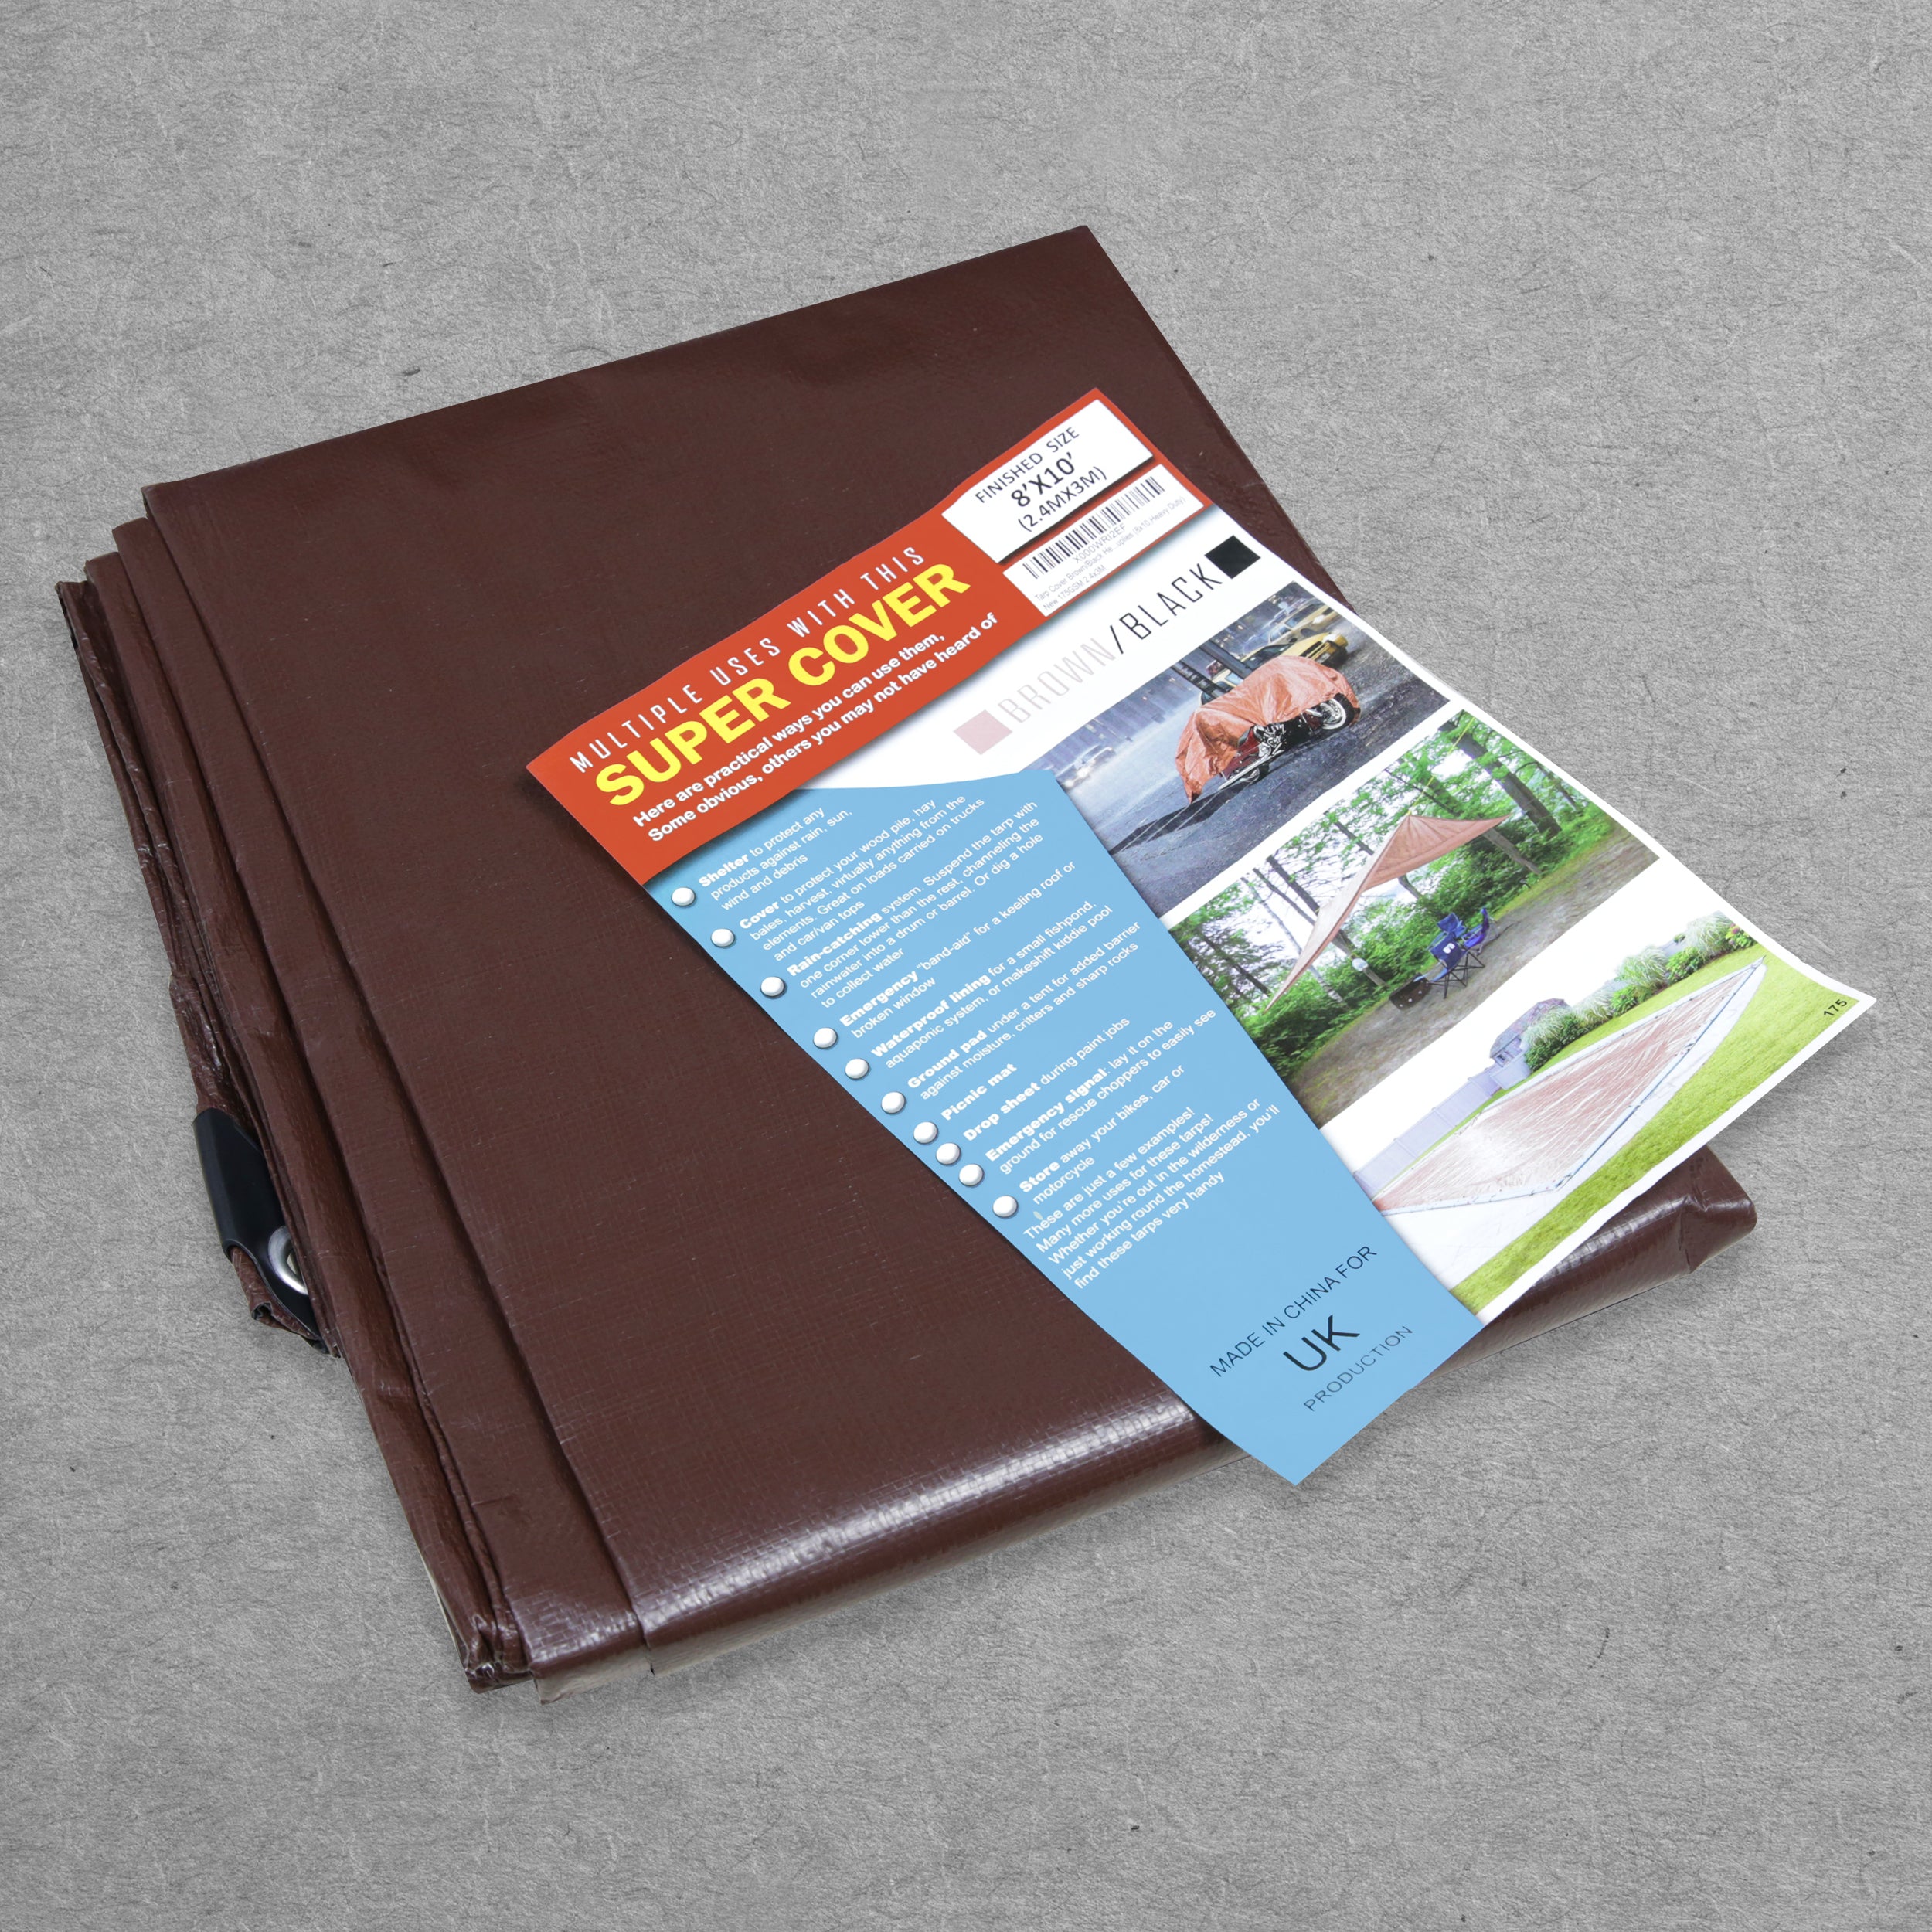 Super Covers Heavy Duty Tarpaulin 175gsm Brown/Black - Various Sizes Available